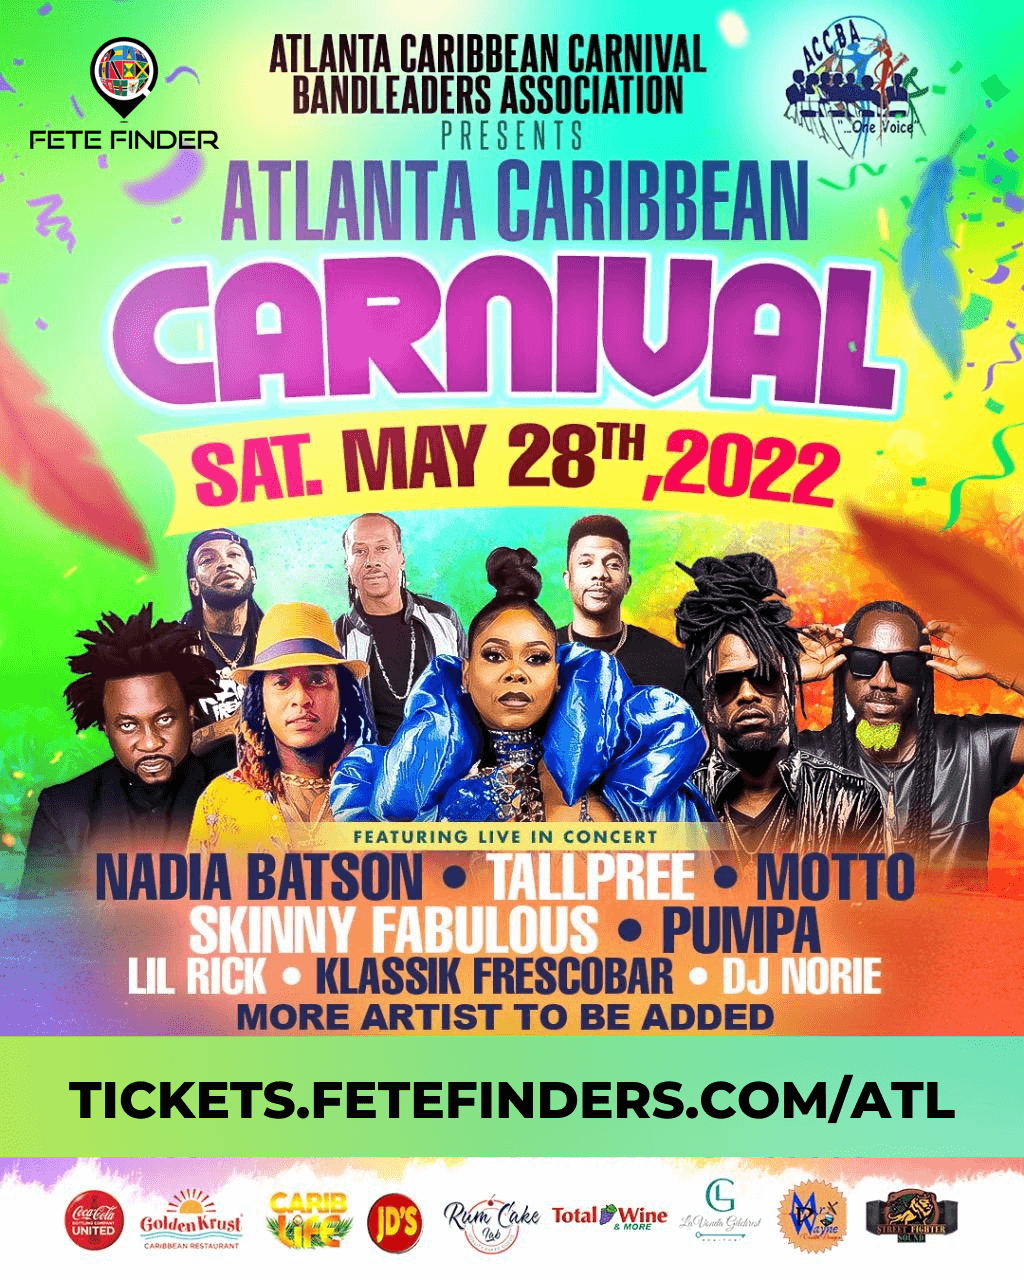 ATLANTA CARIBBEAN CARNIVAL 2022  on may. 28, 10:00@Central Park - Buy tickets and Get information on www.fetefinders.com tickets.fetefinders.com